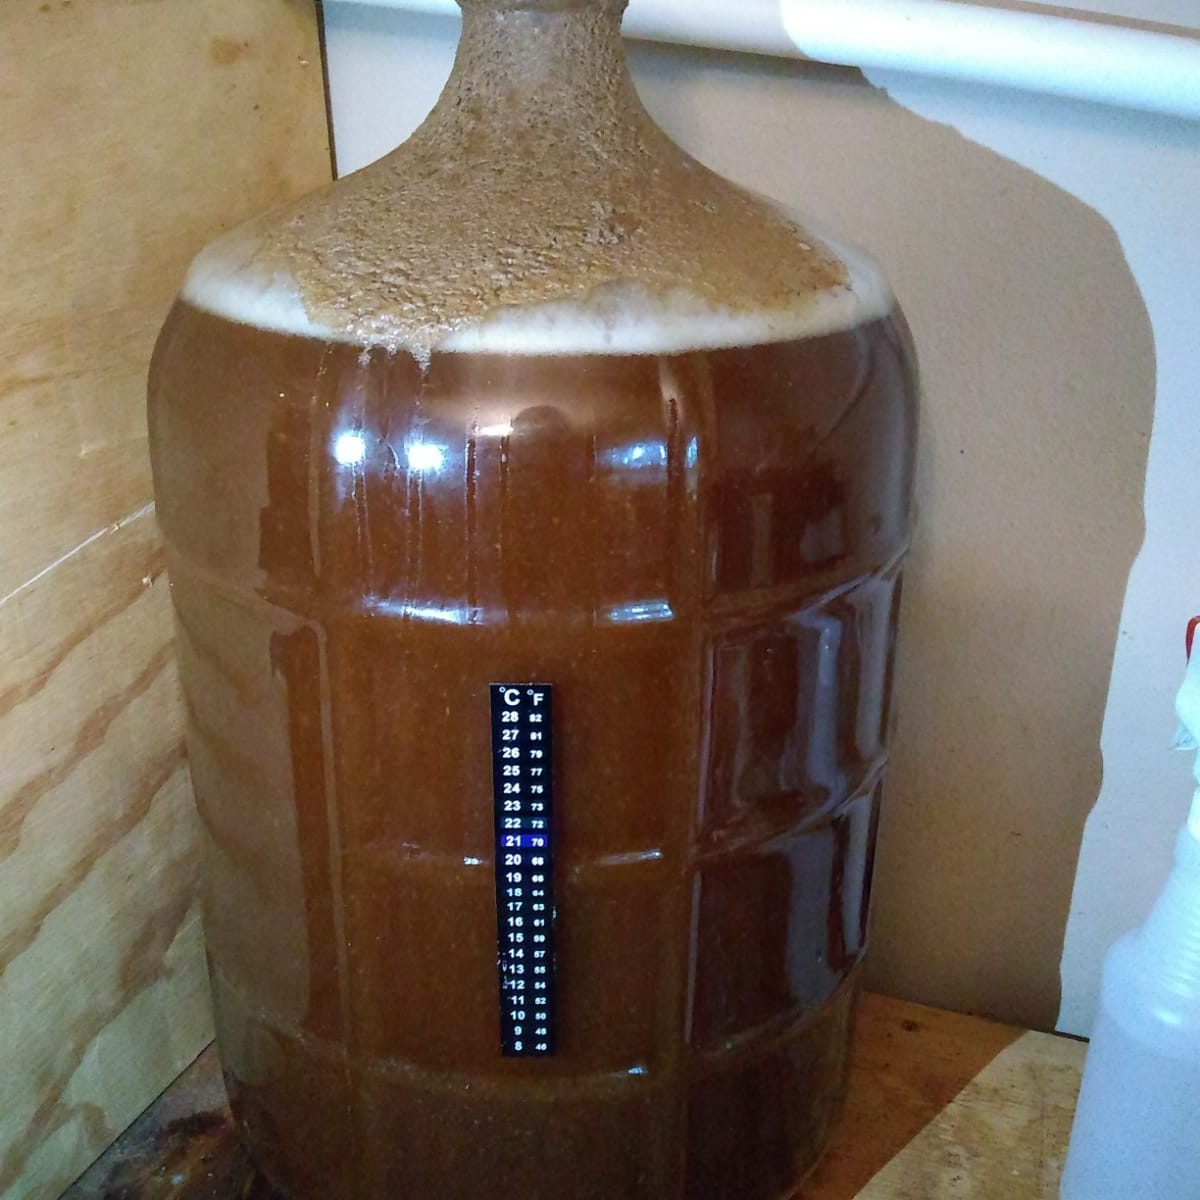 The fermentor with the stop off, the top is covered by dried foam and it doesn't look great.